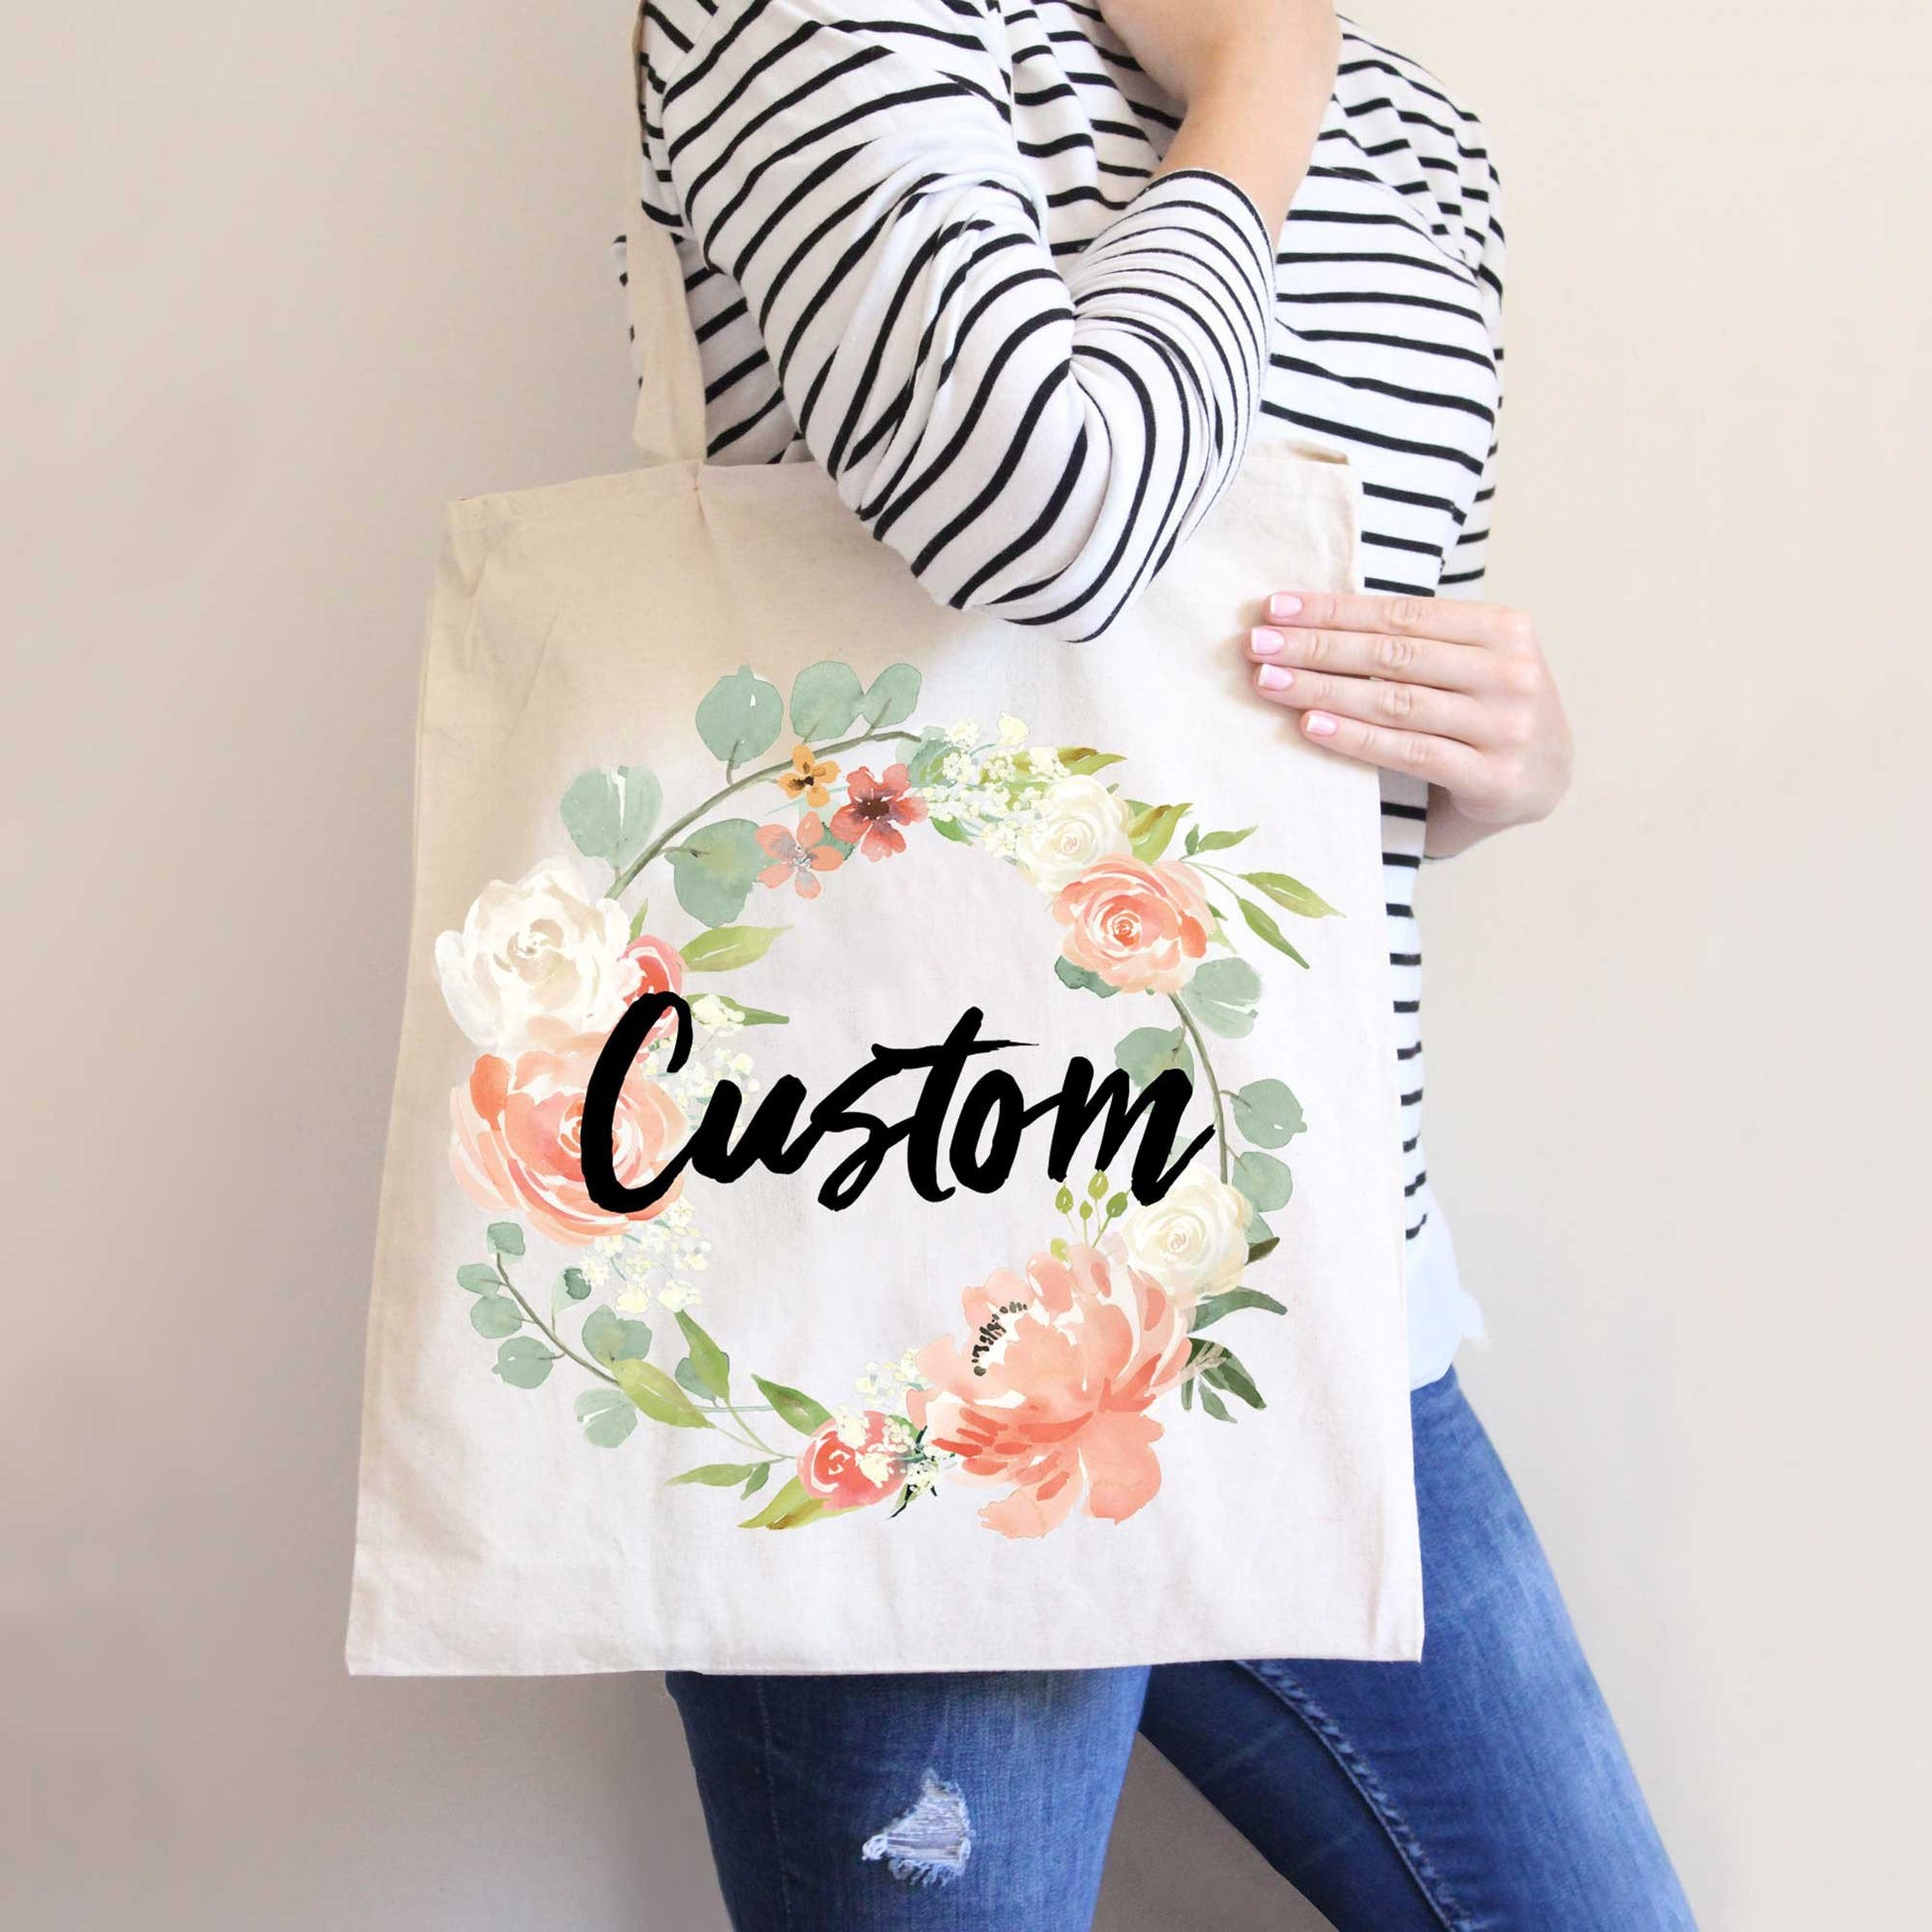 Personalized Wedding Floral Tote Bags Gift for Bridesmaid 